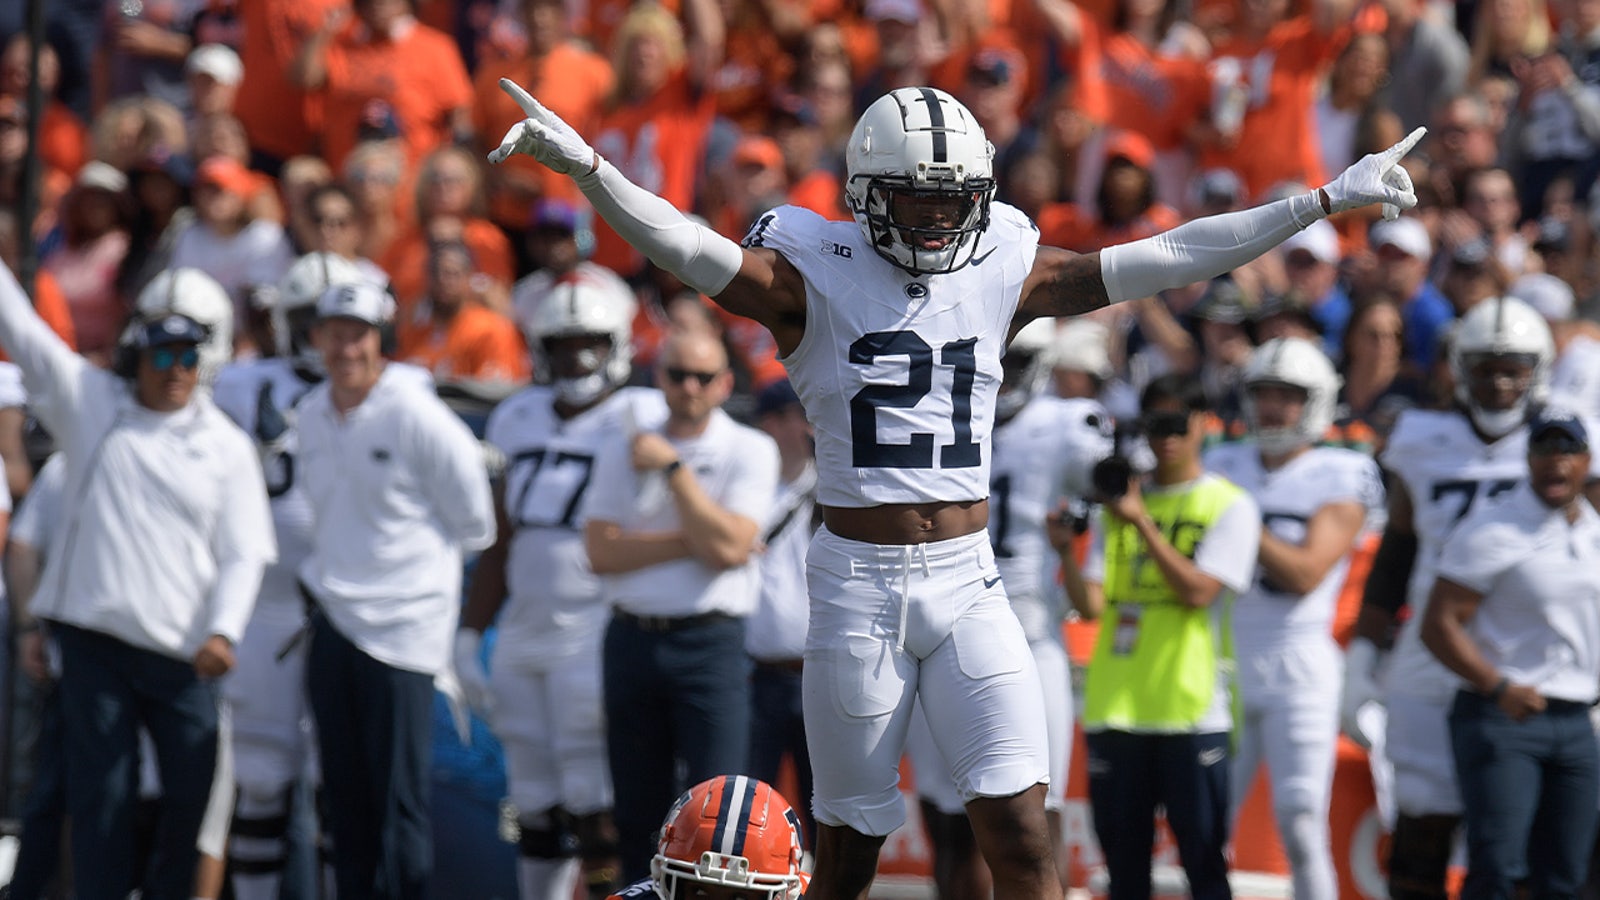 Penn State forces five turnovers in victory over Illinois